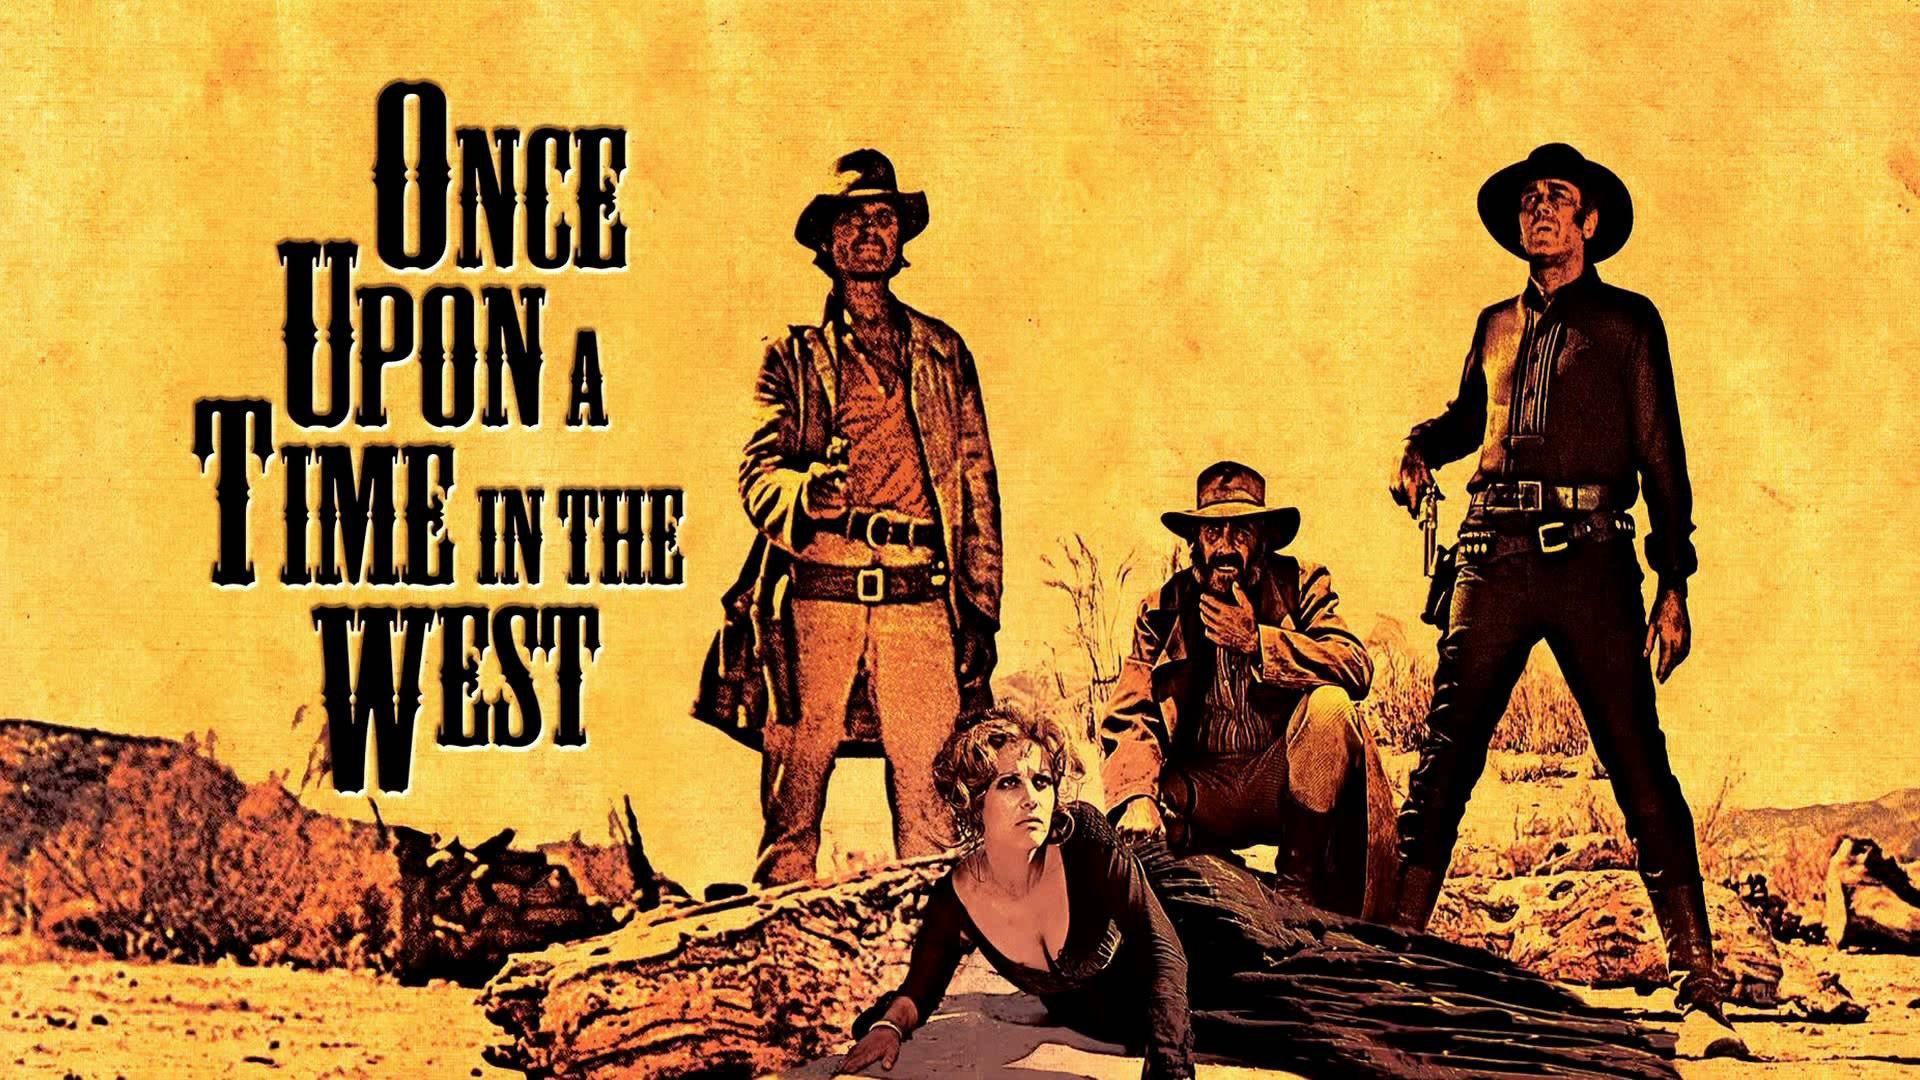 Once Upon a Time in the West / Once Upon a Time in the West (1968)